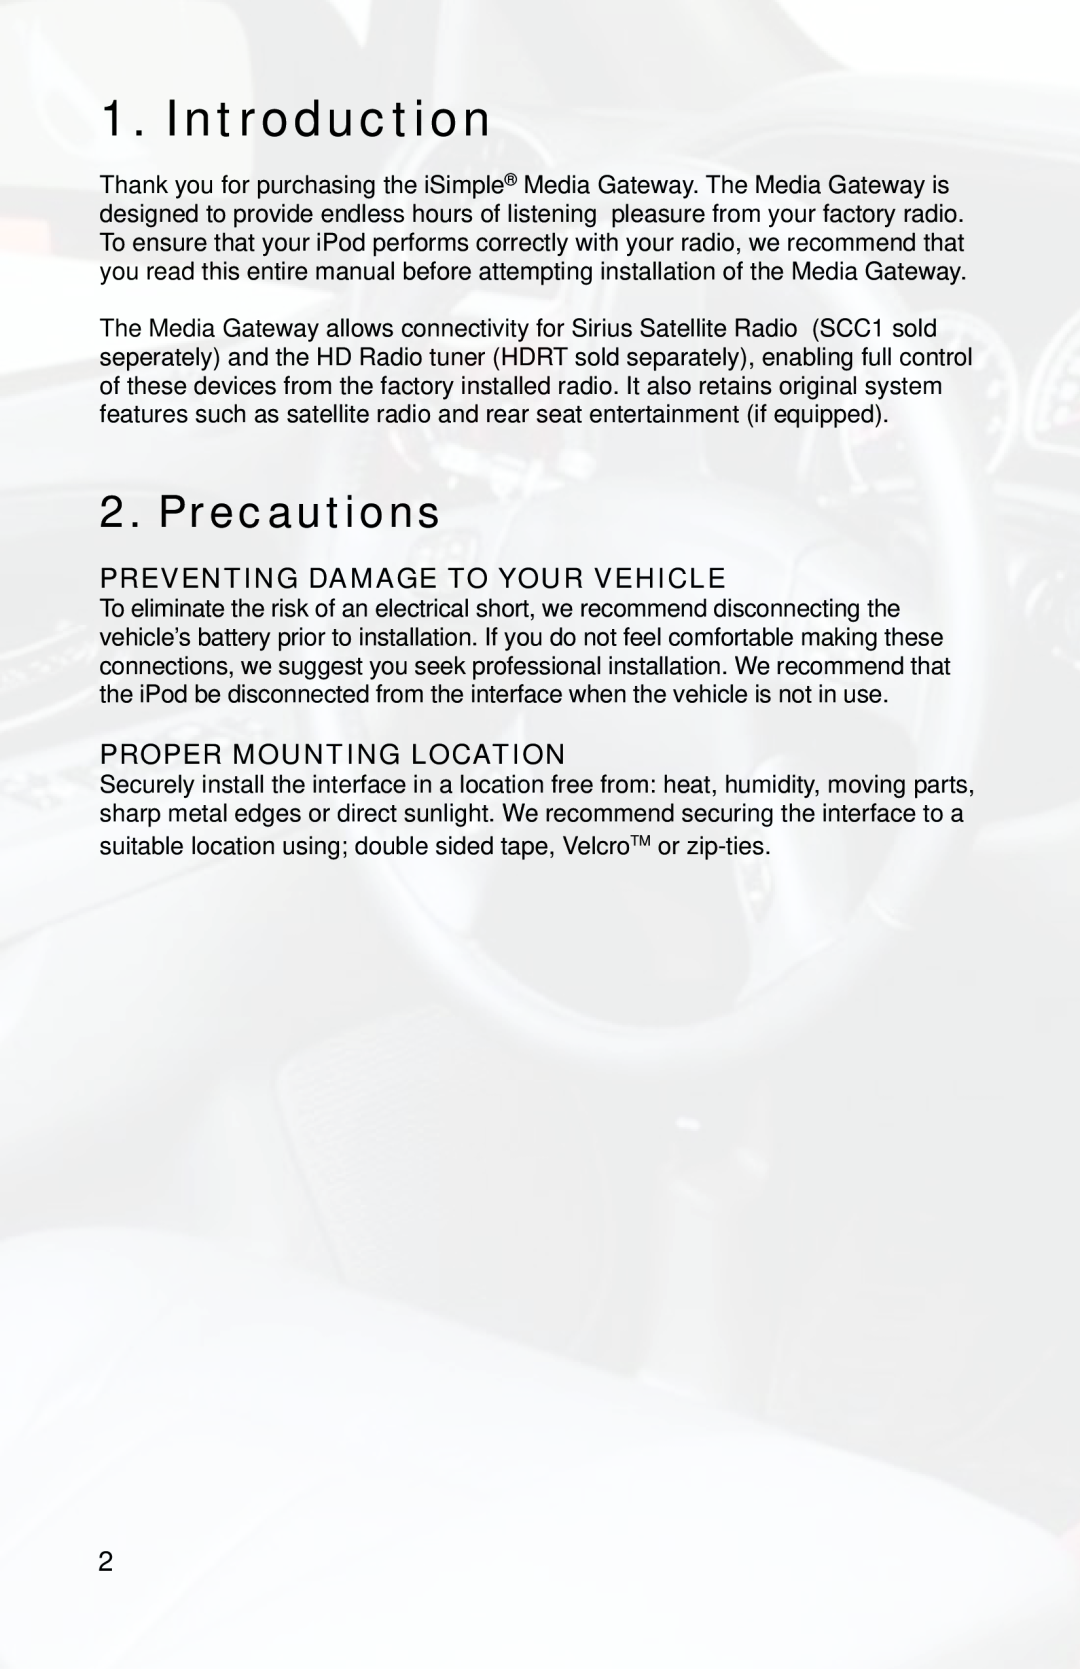 iSimple ISGM11, PGHGM5 owner manual Introduction, Precautions, Preventing Damage To Your Vehicle, Proper Mounting Location 